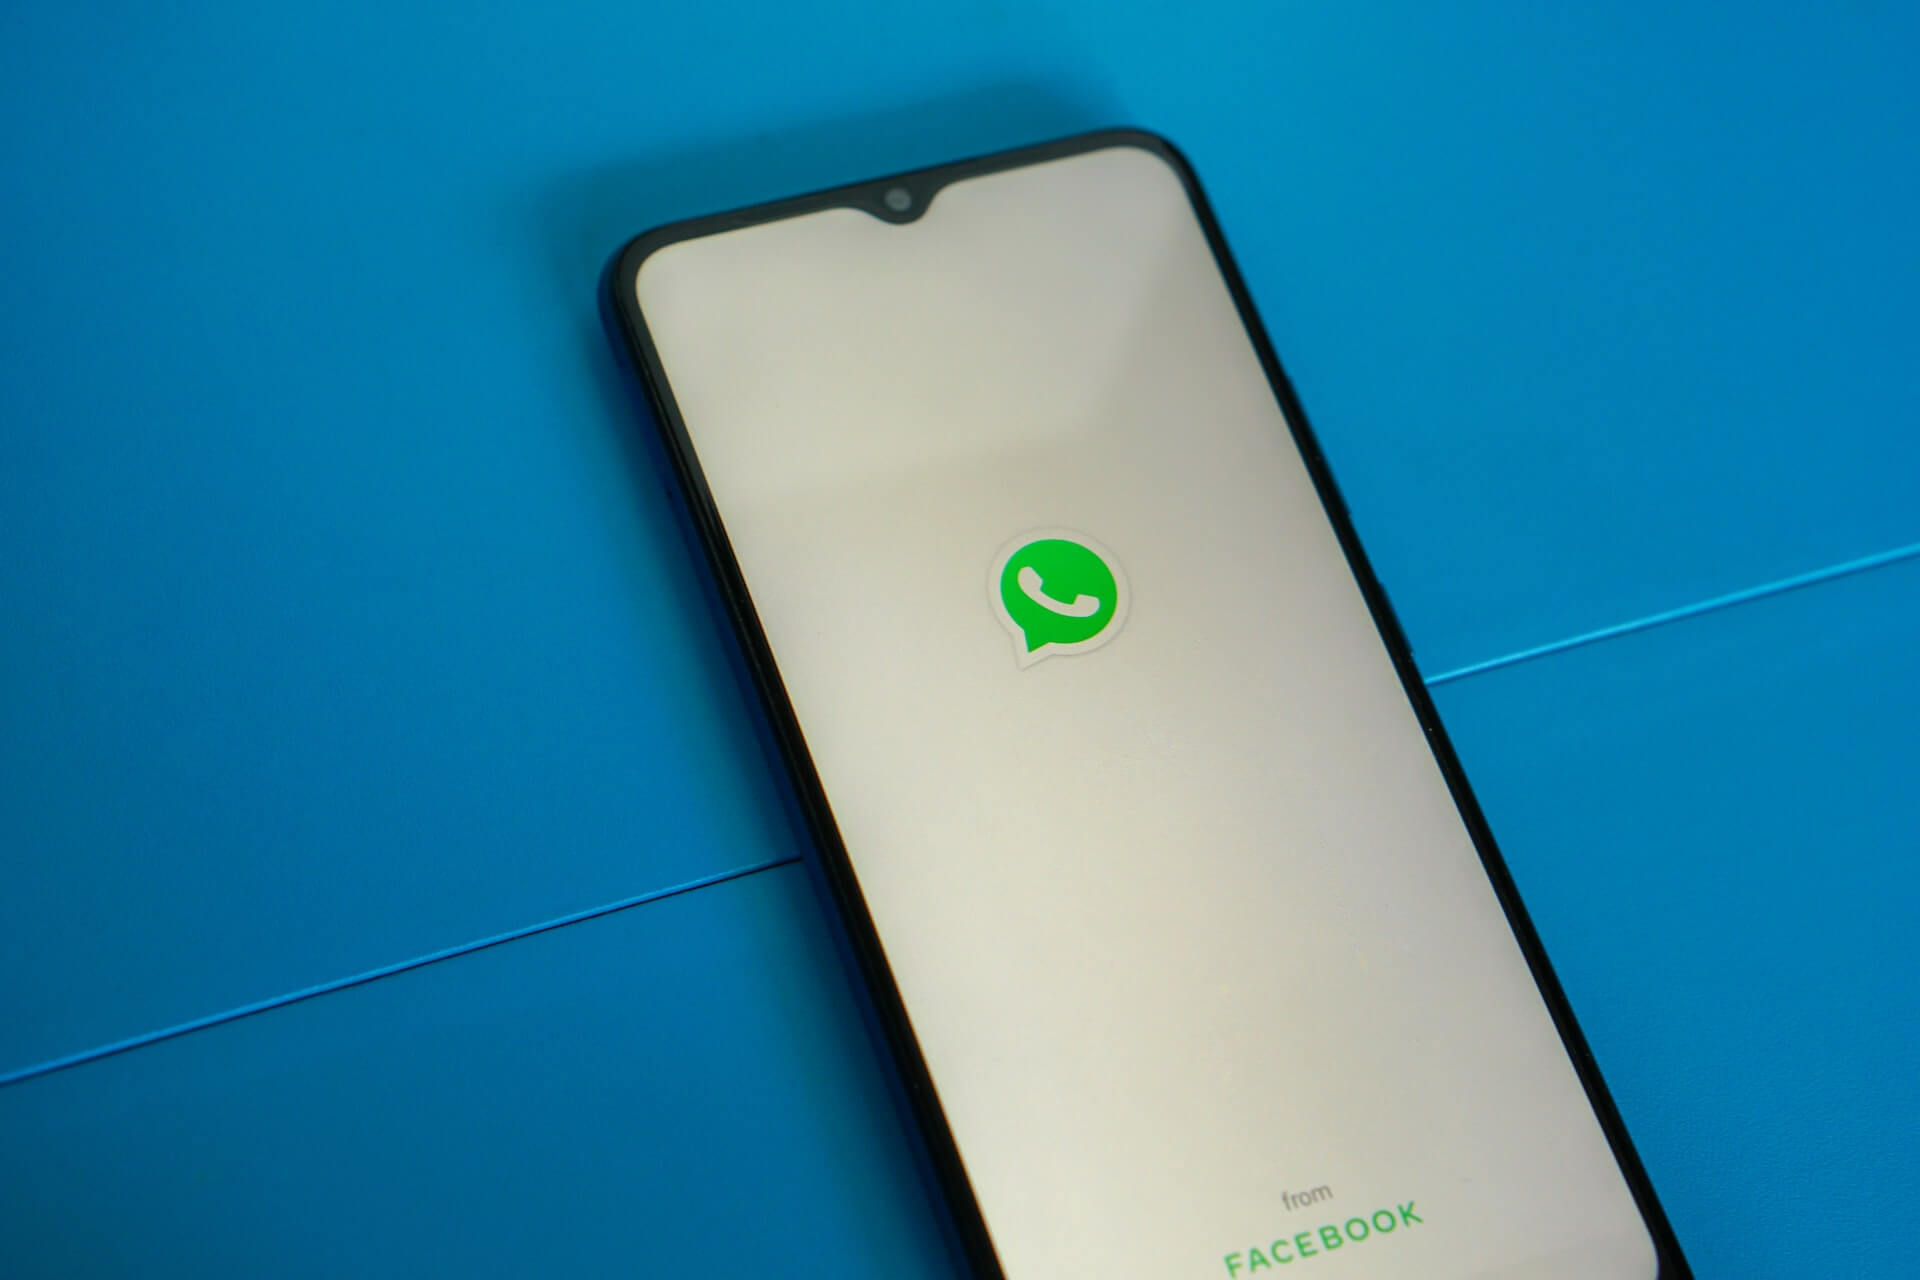 How to Share Facebook Videos on WhatsApp